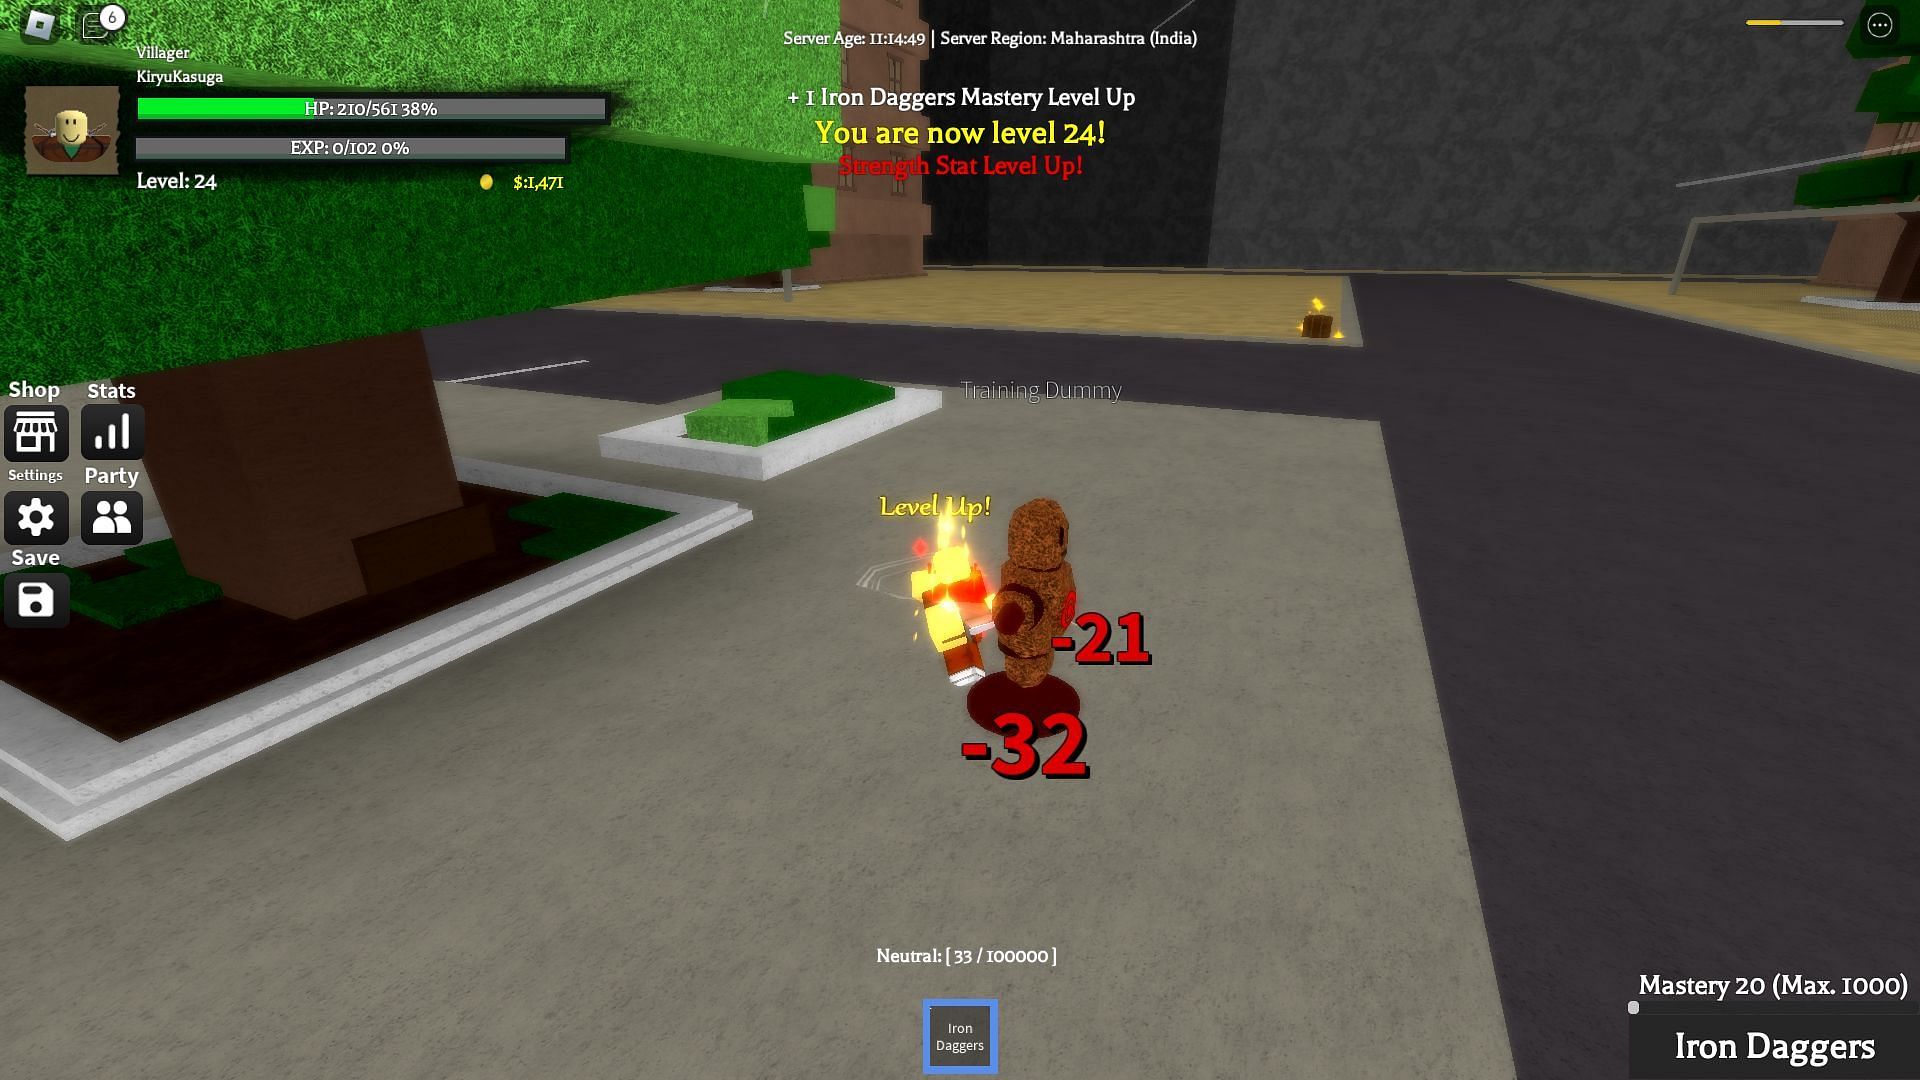 Using a training dummy to level up (Image via Roblox)